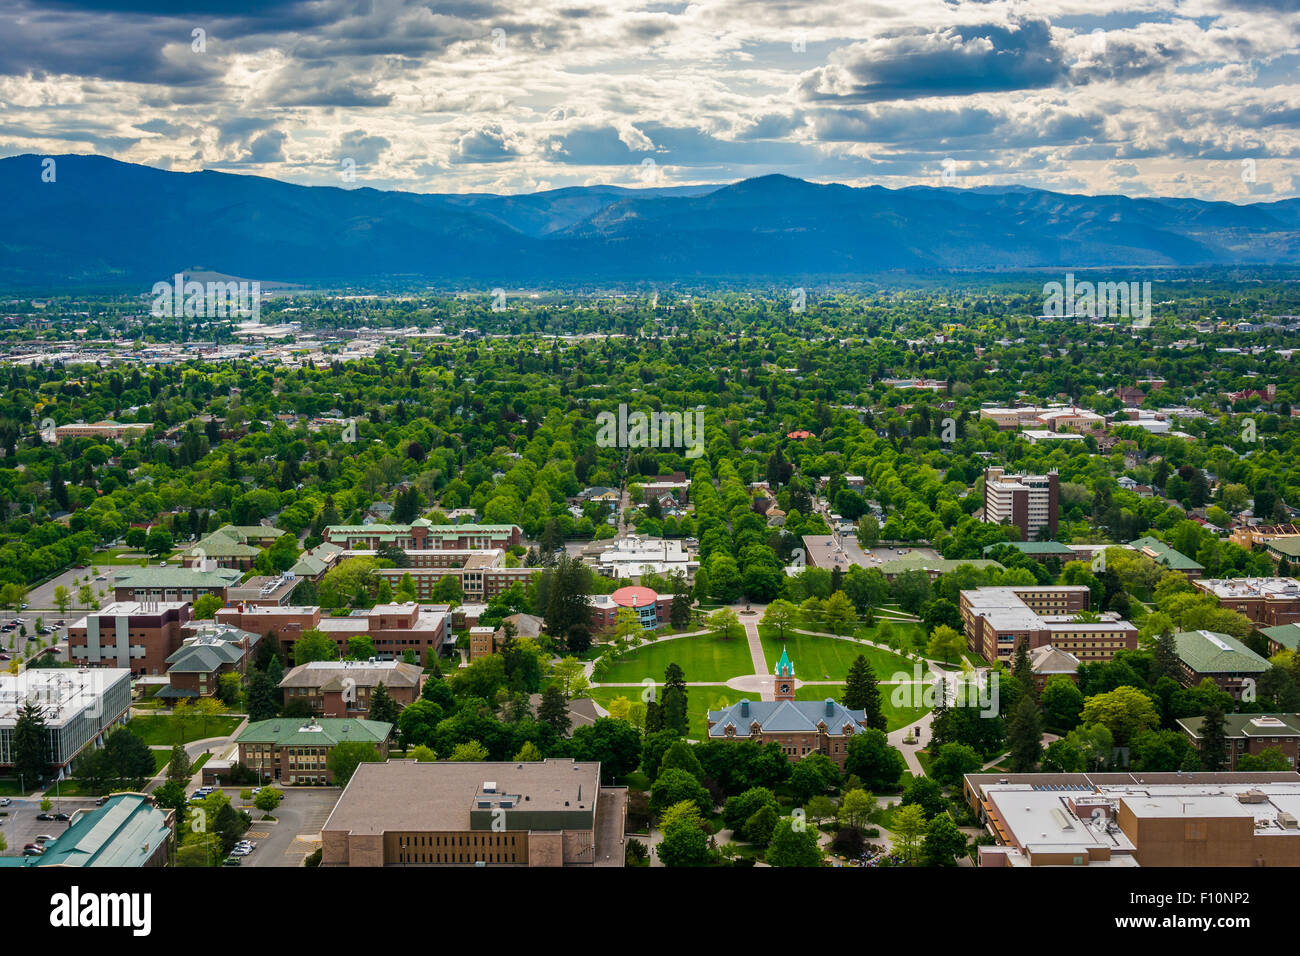 View of University of Montana from Mount Sentinel, in Missoula, Montana. Stock Photo